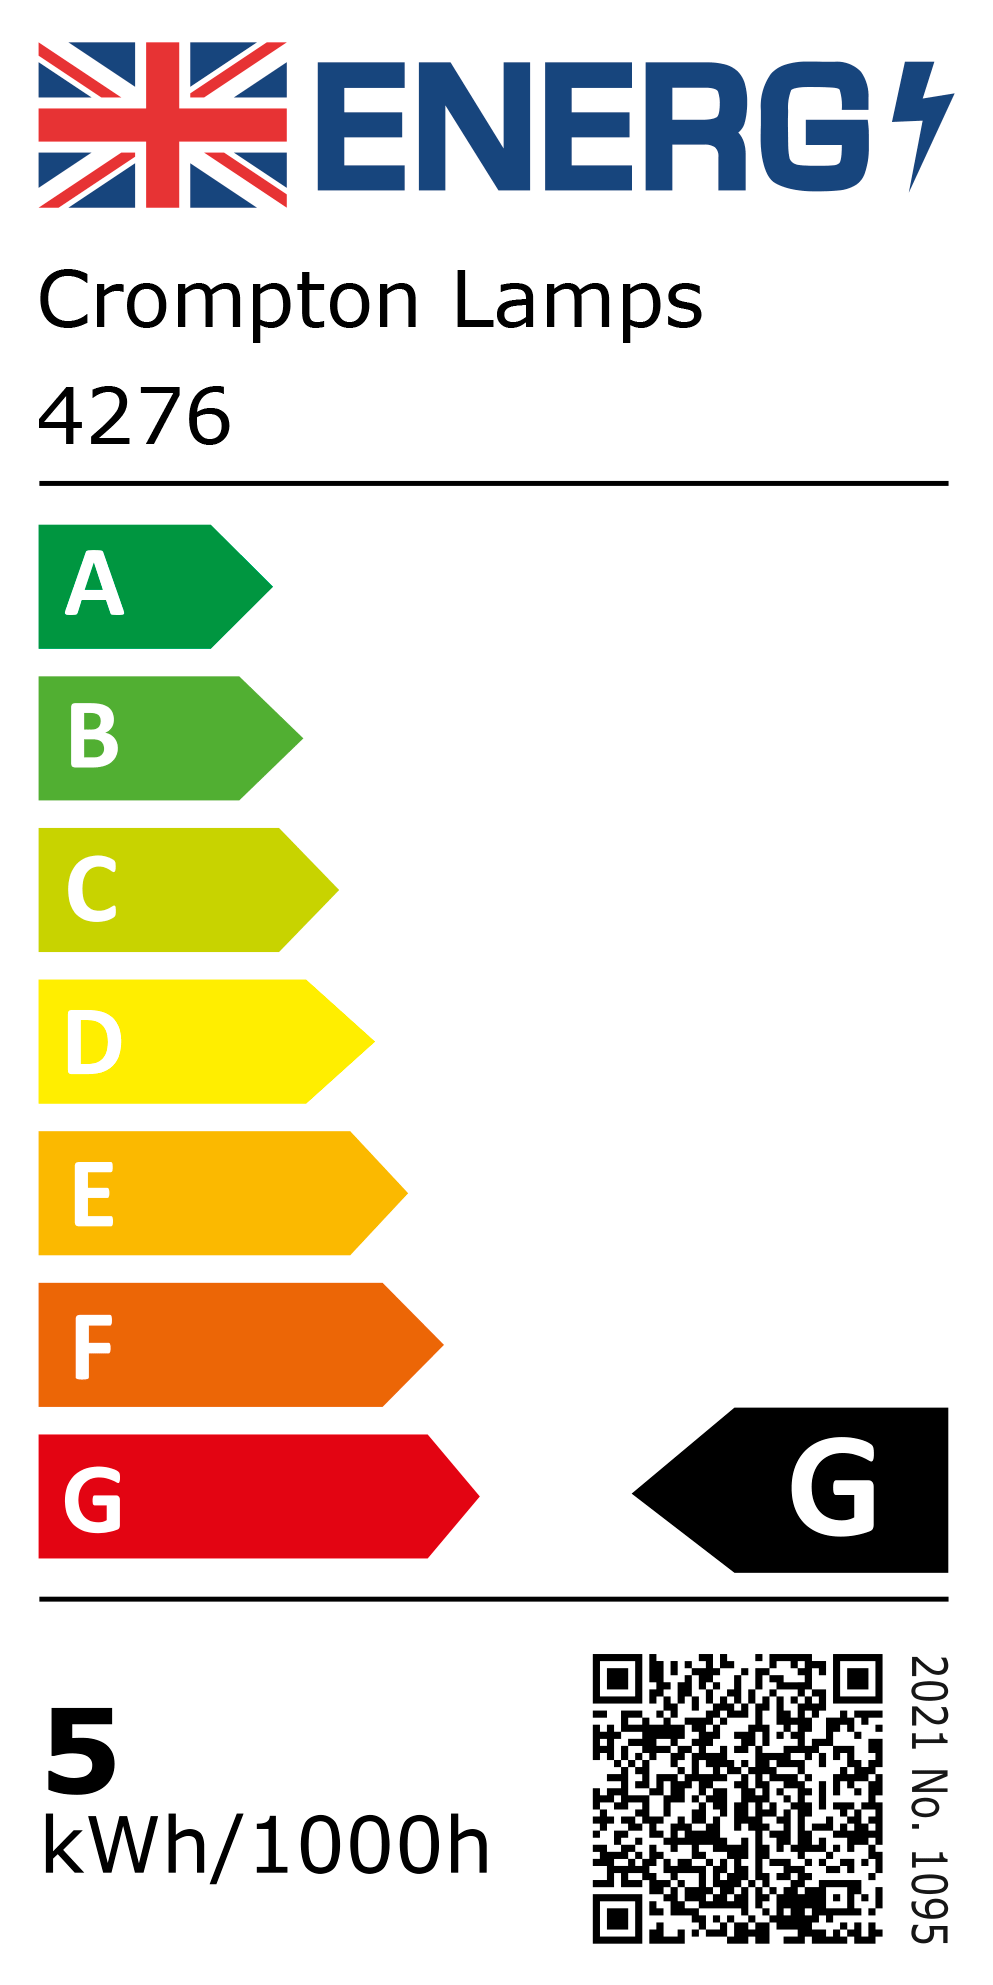 New 2021 Energy Rating Label: Stock Code 4276